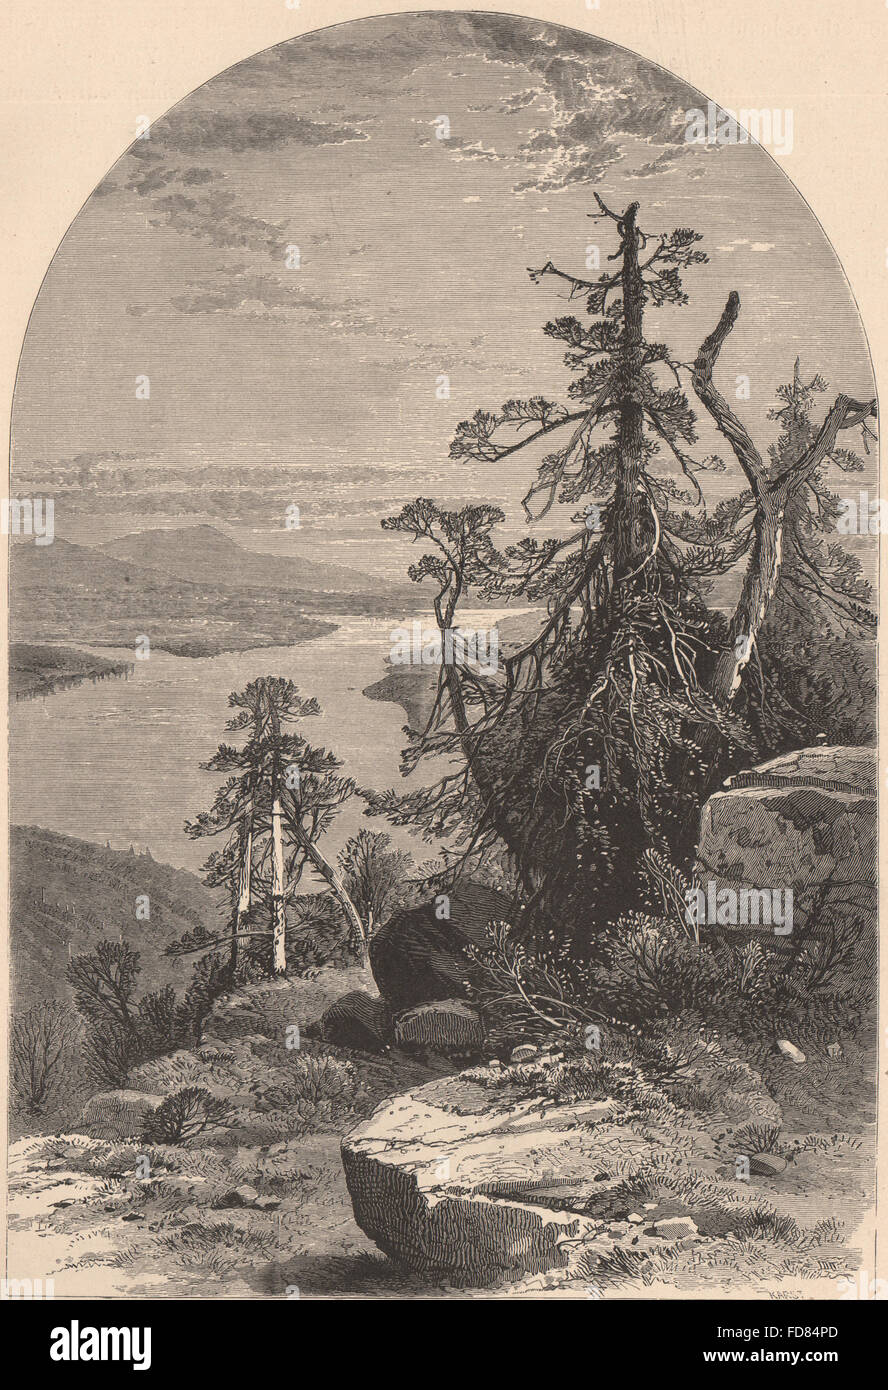 LAKE MEMPHREMAGOG: North from Owl's head. Quebec, antique print 1874 Stock Photo